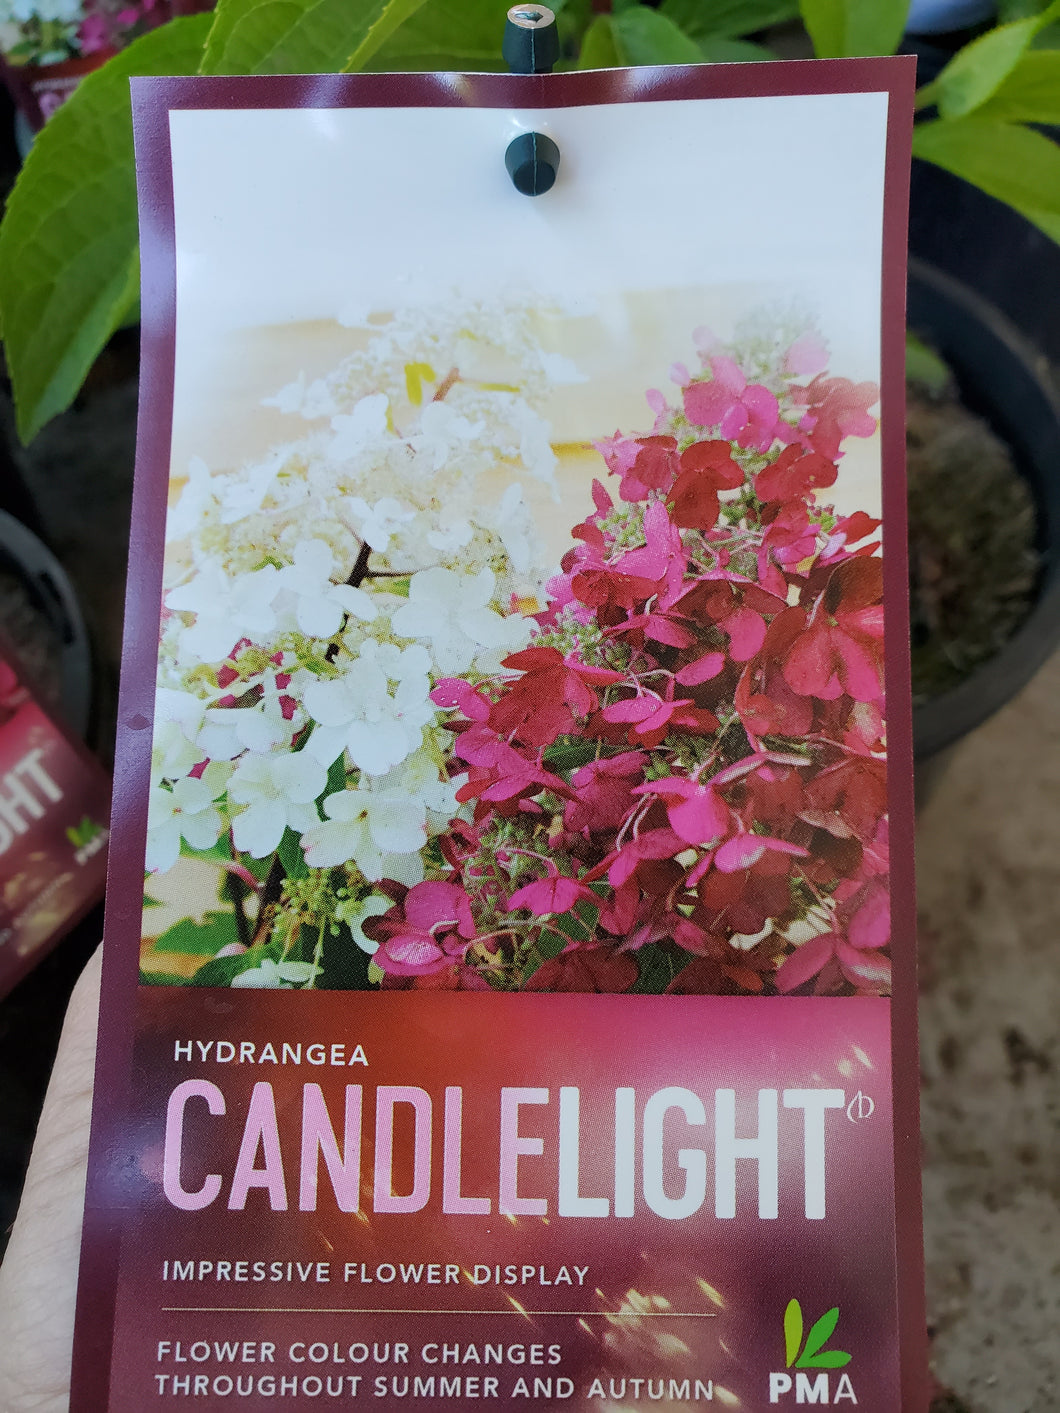 Candlelight Hydrangea paniculata. Pick up only. Special listing for local customers